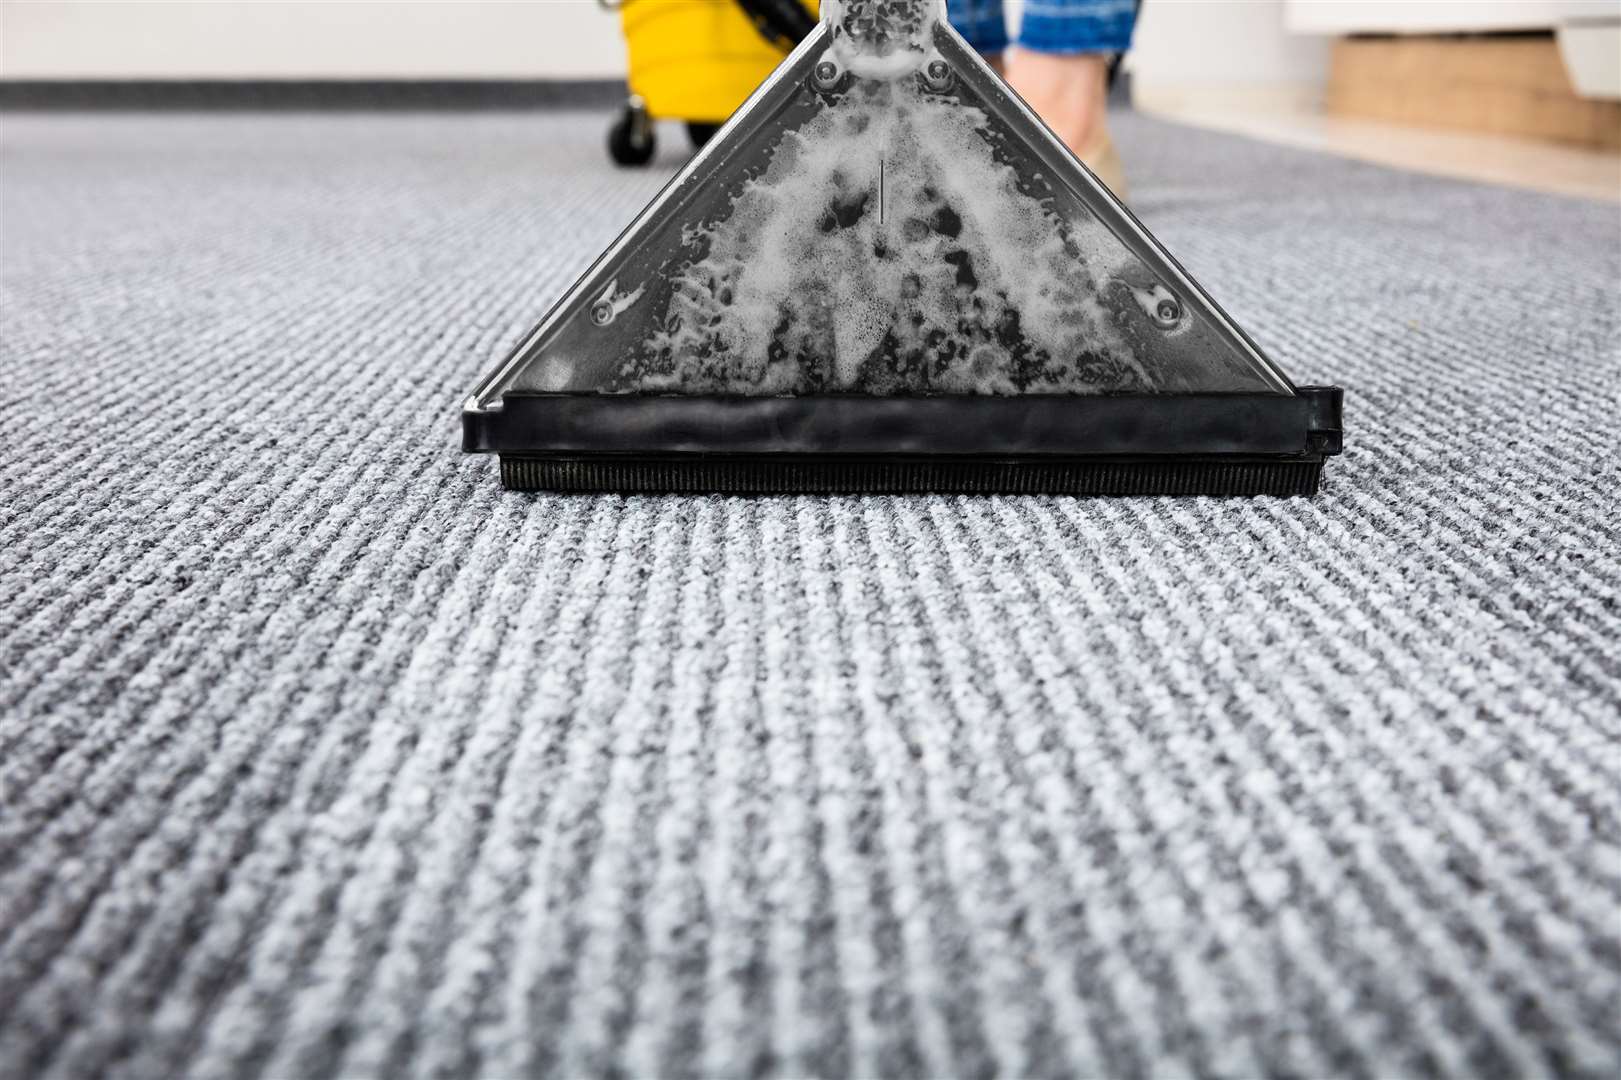 Your carpets can be revitalised with a professional clean